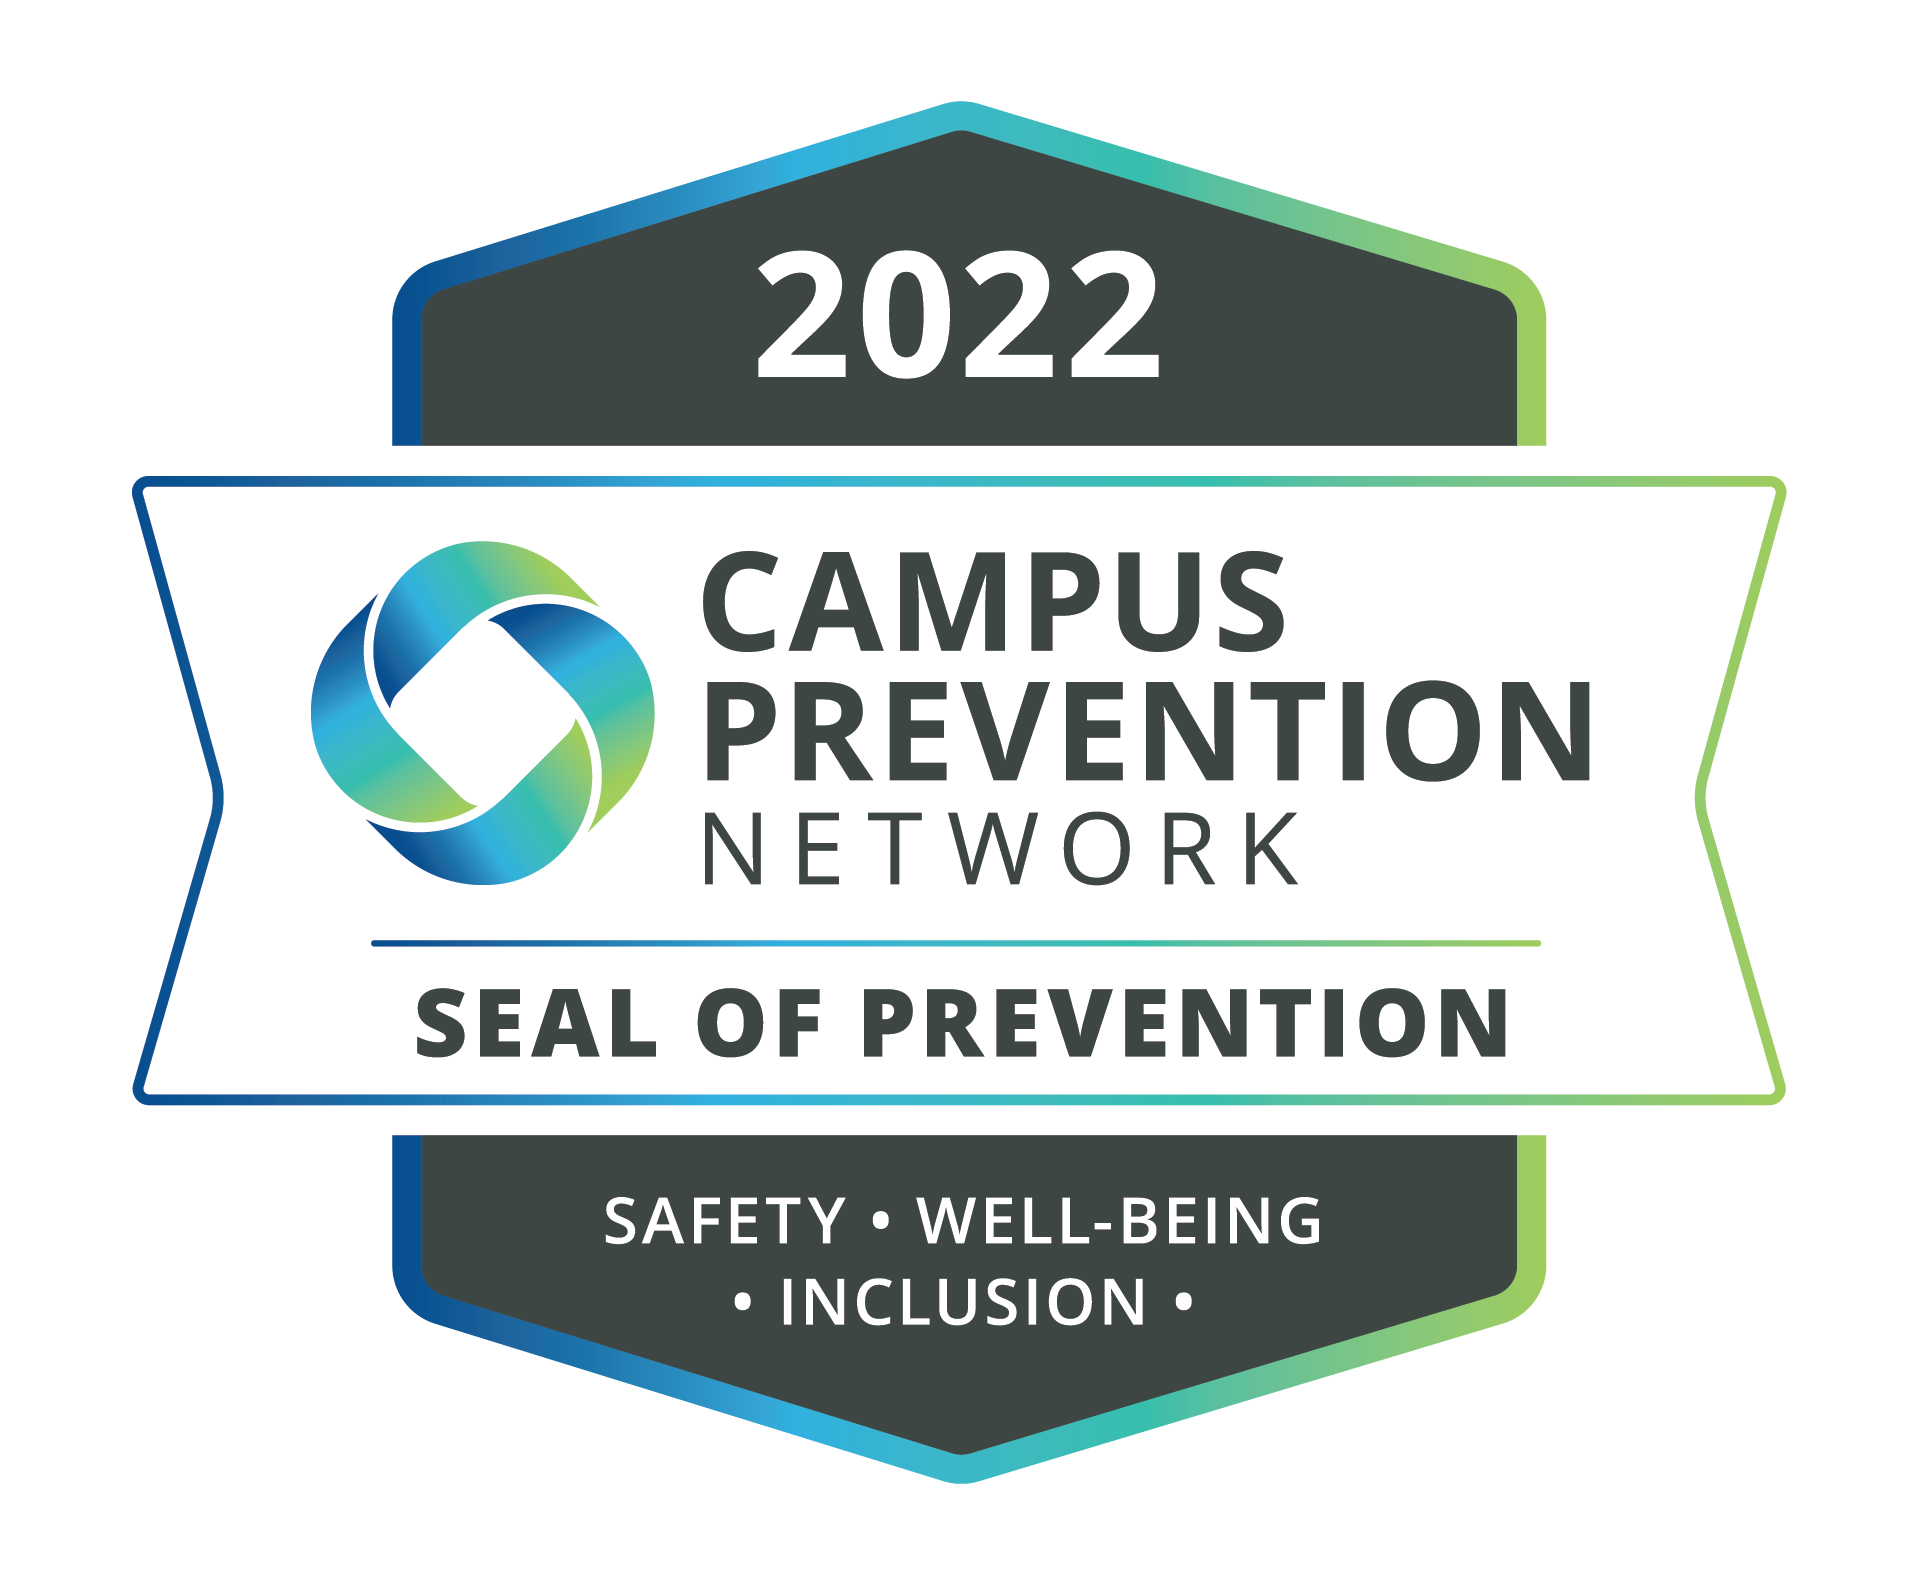 Campus Prevention Network Seal of Prevention for 2022